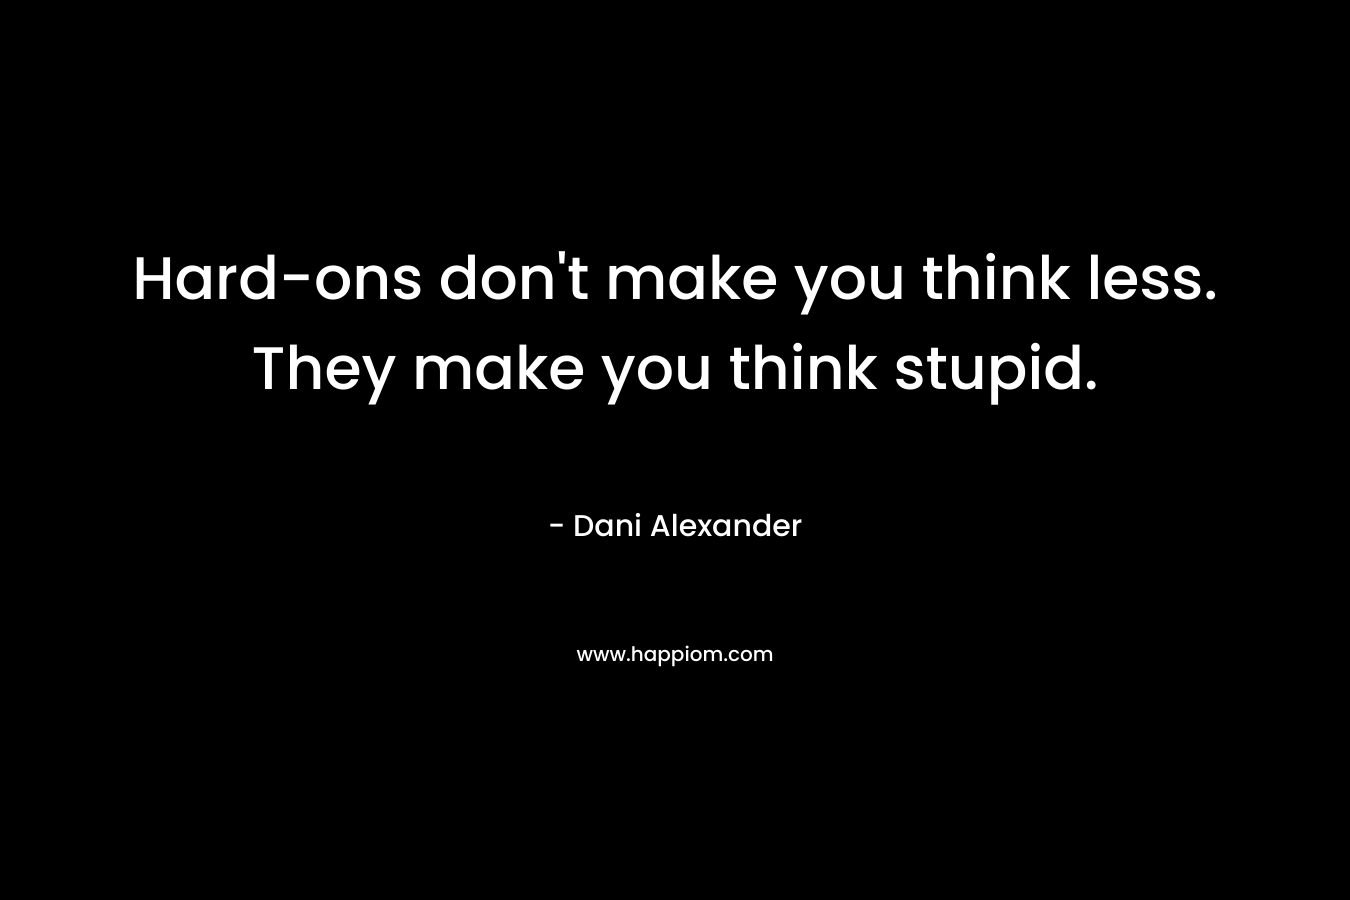 Hard-ons don't make you think less. They make you think stupid.